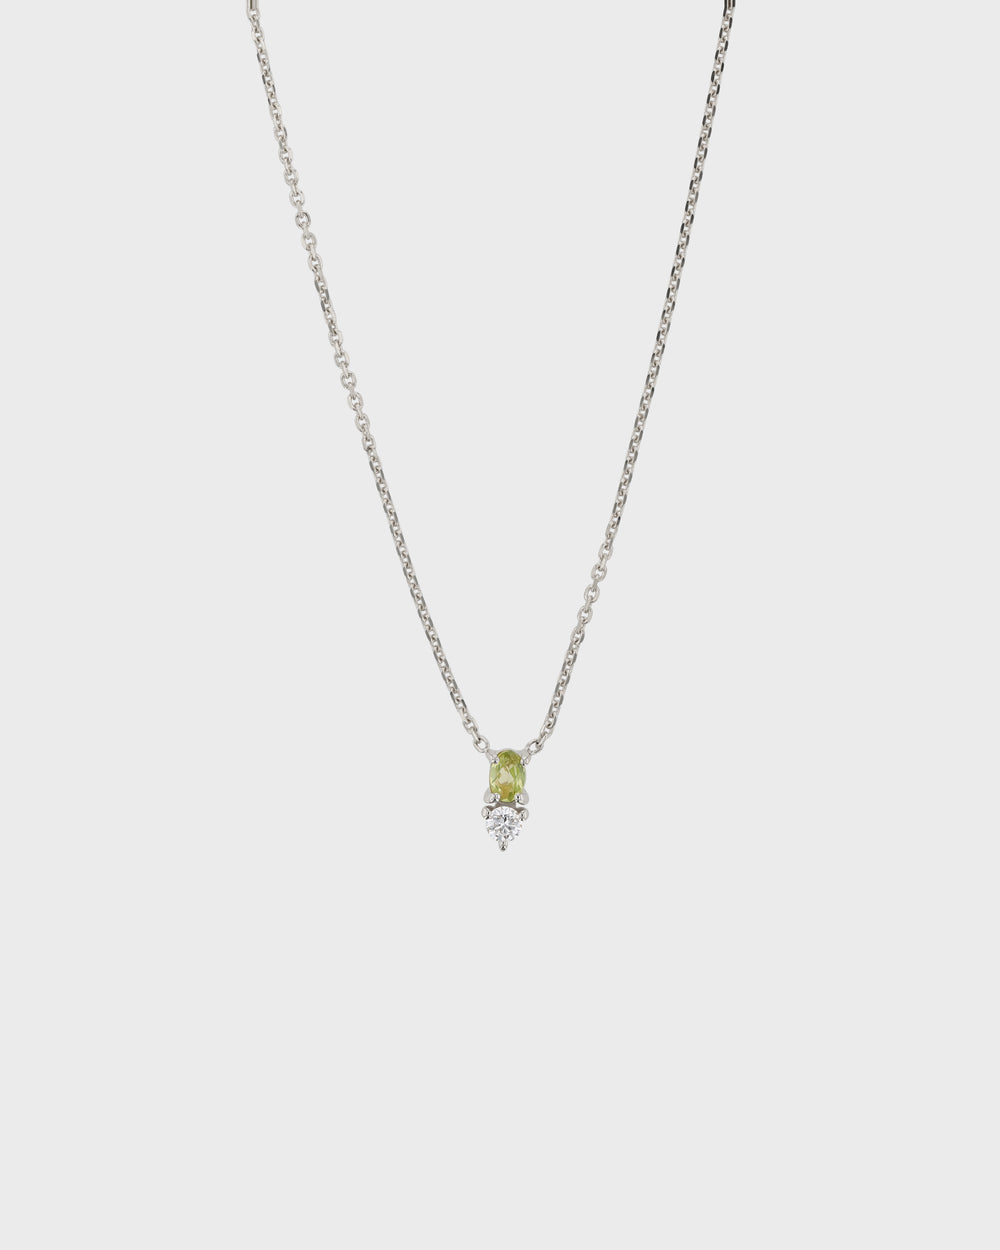 Buy Simulated Peridot Diamond Necklace 18 Inches in Sterling Silver and  Stainless Steel 3.10 ctw at ShopLC.